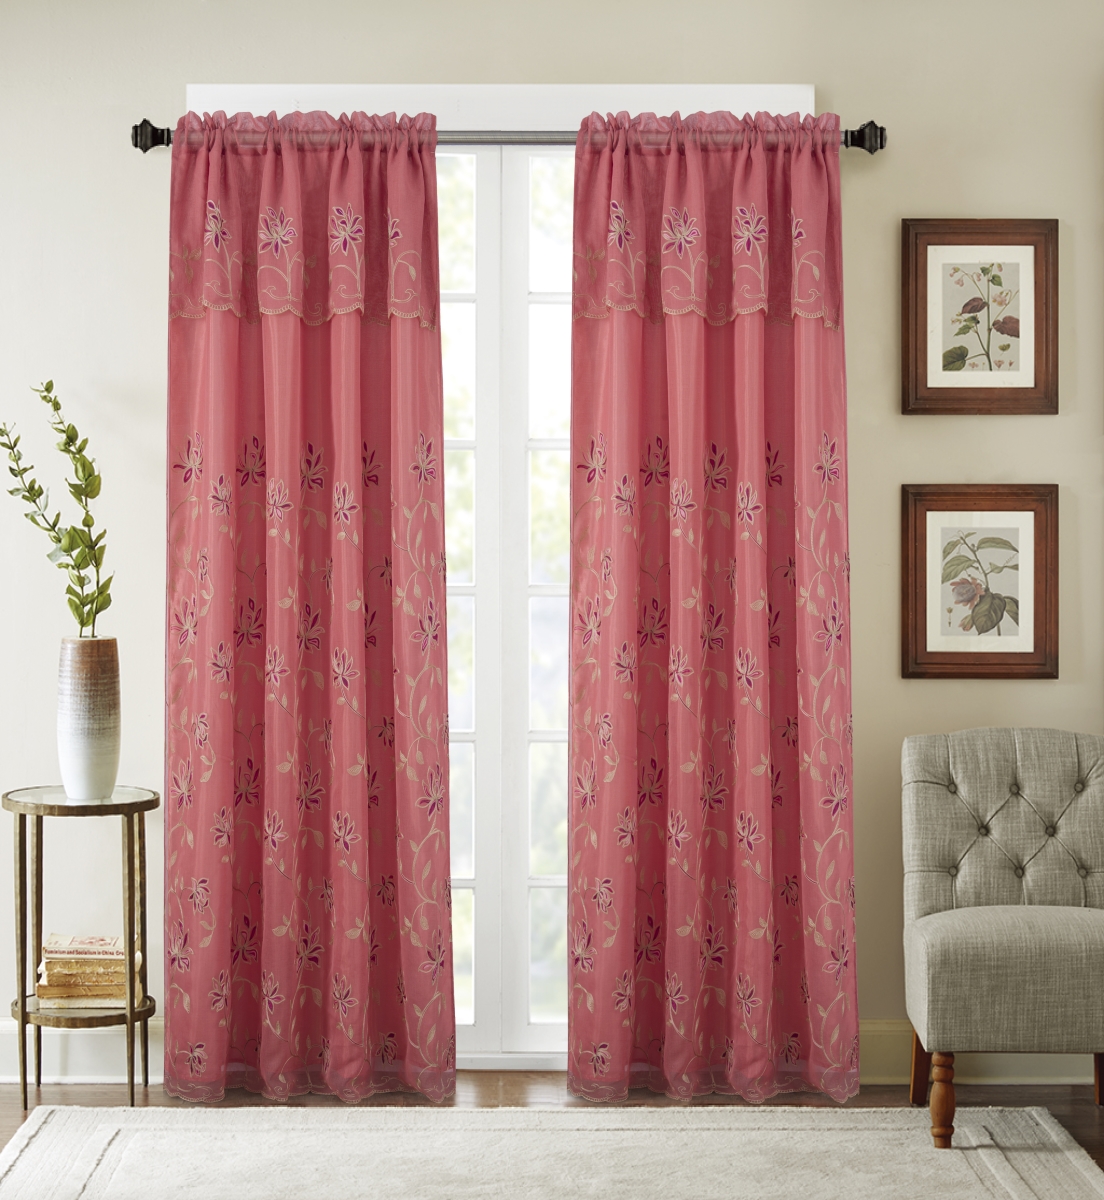 Pnd23693 54 X 84 In. Durant Floral Embroidered Single Rod Pocket Curtain Panel With Attached Valance, Terracotta